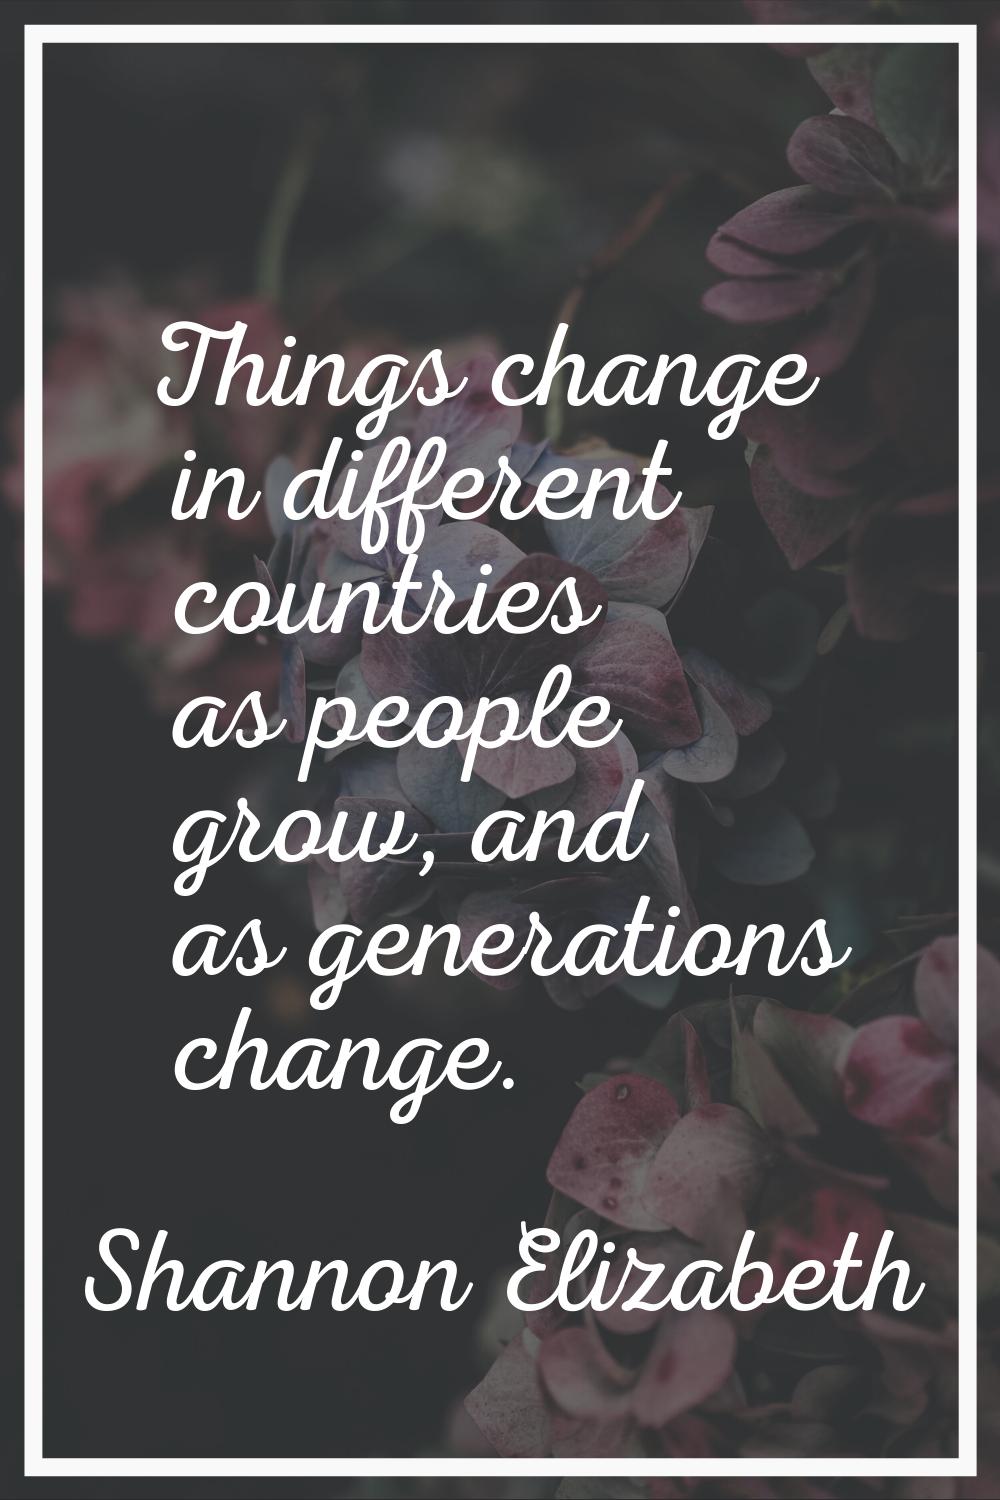 Things change in different countries as people grow, and as generations change.